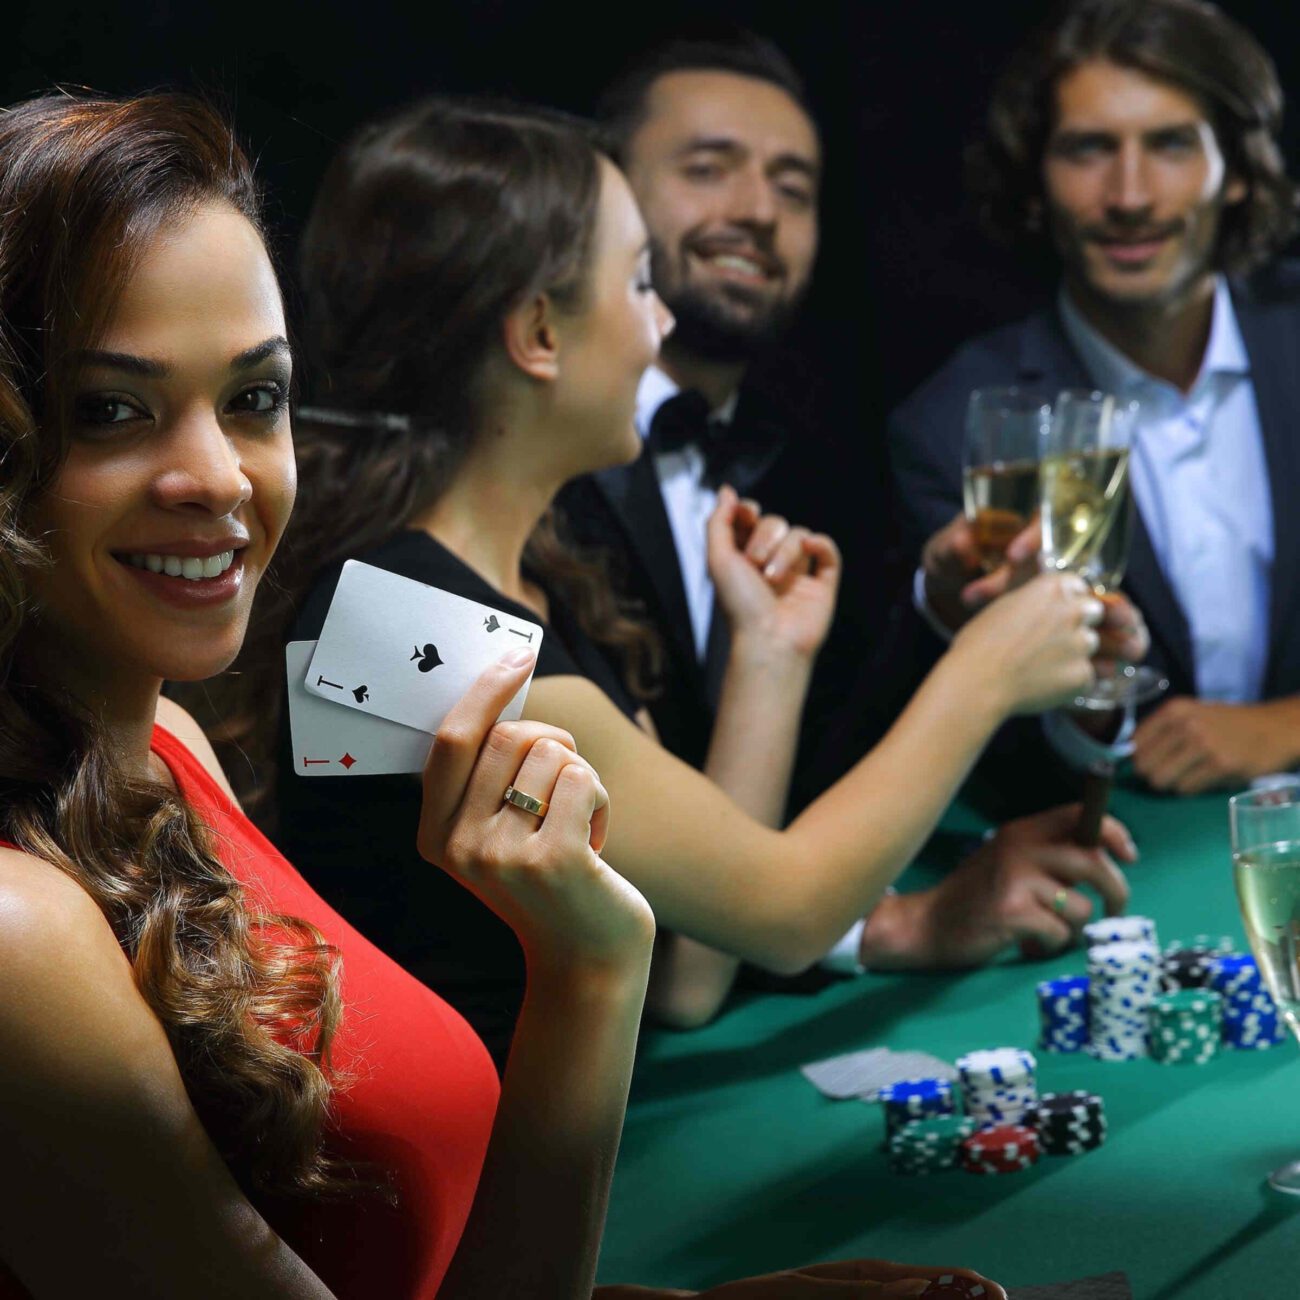 Tired of playing the tables just to lose? Here are the 6 tips for winning at Blackjack! Turn your next hand into the one that wins big.